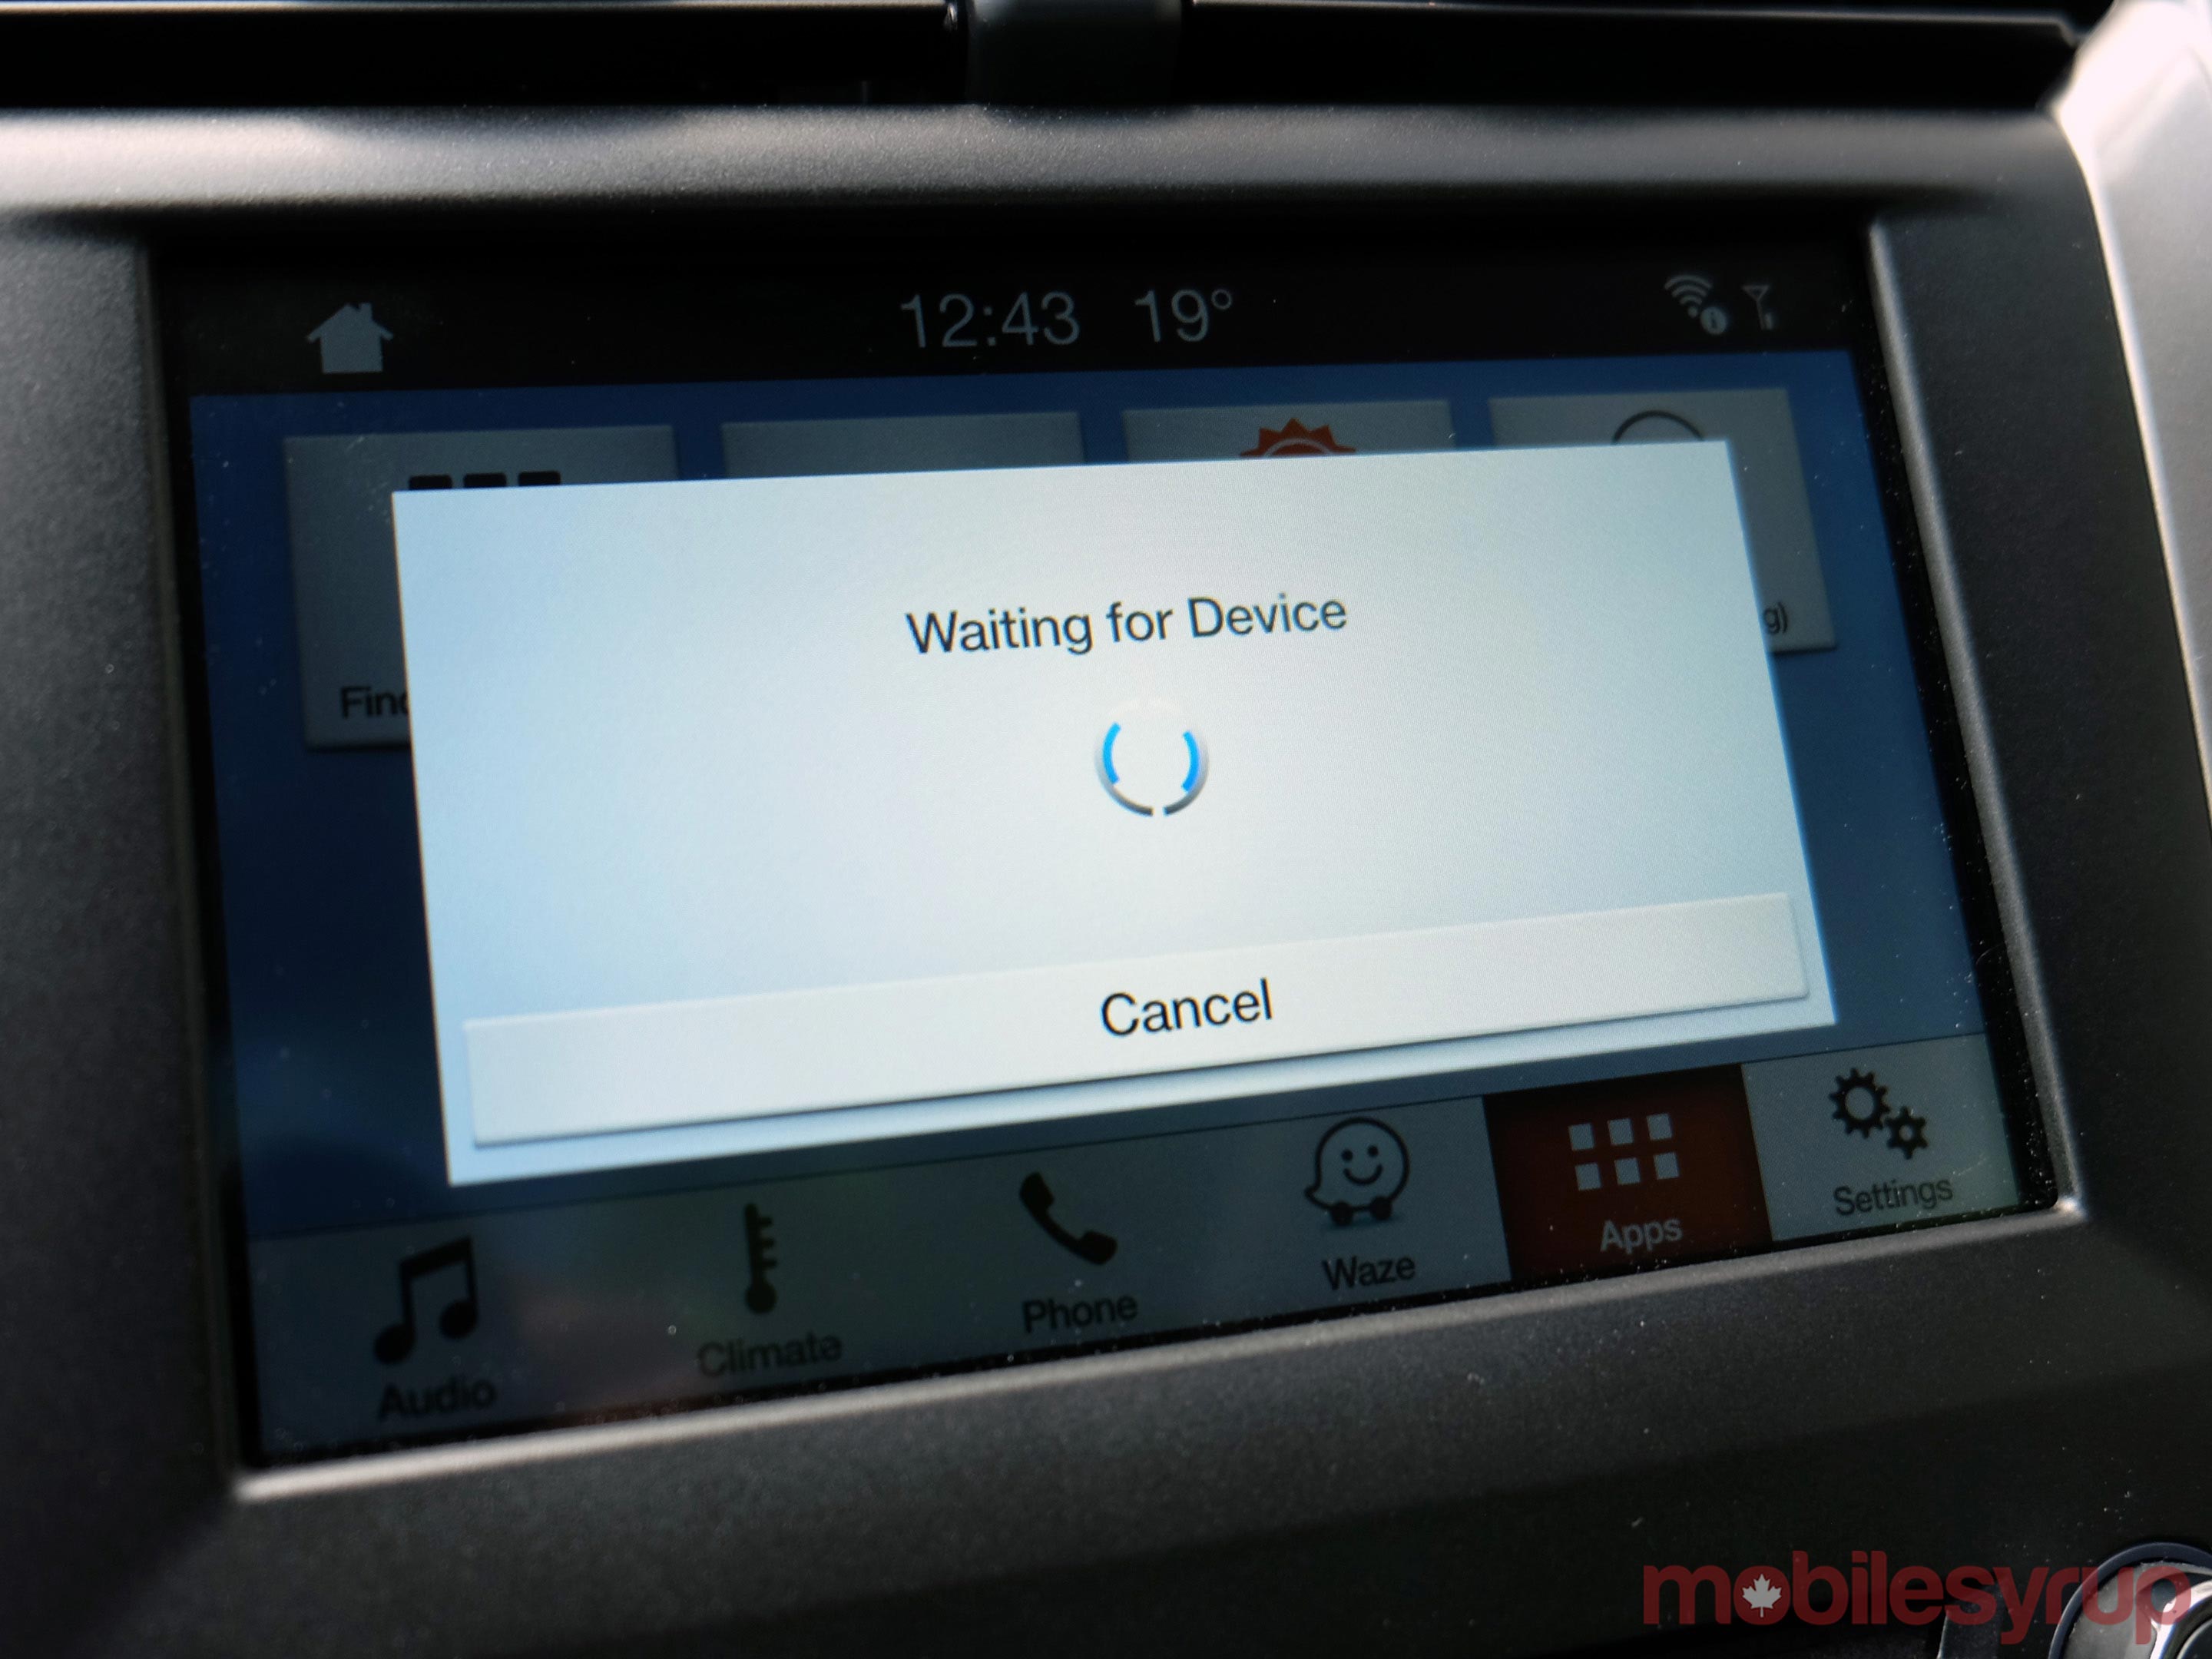 Waze-Ford Sync waiting for device